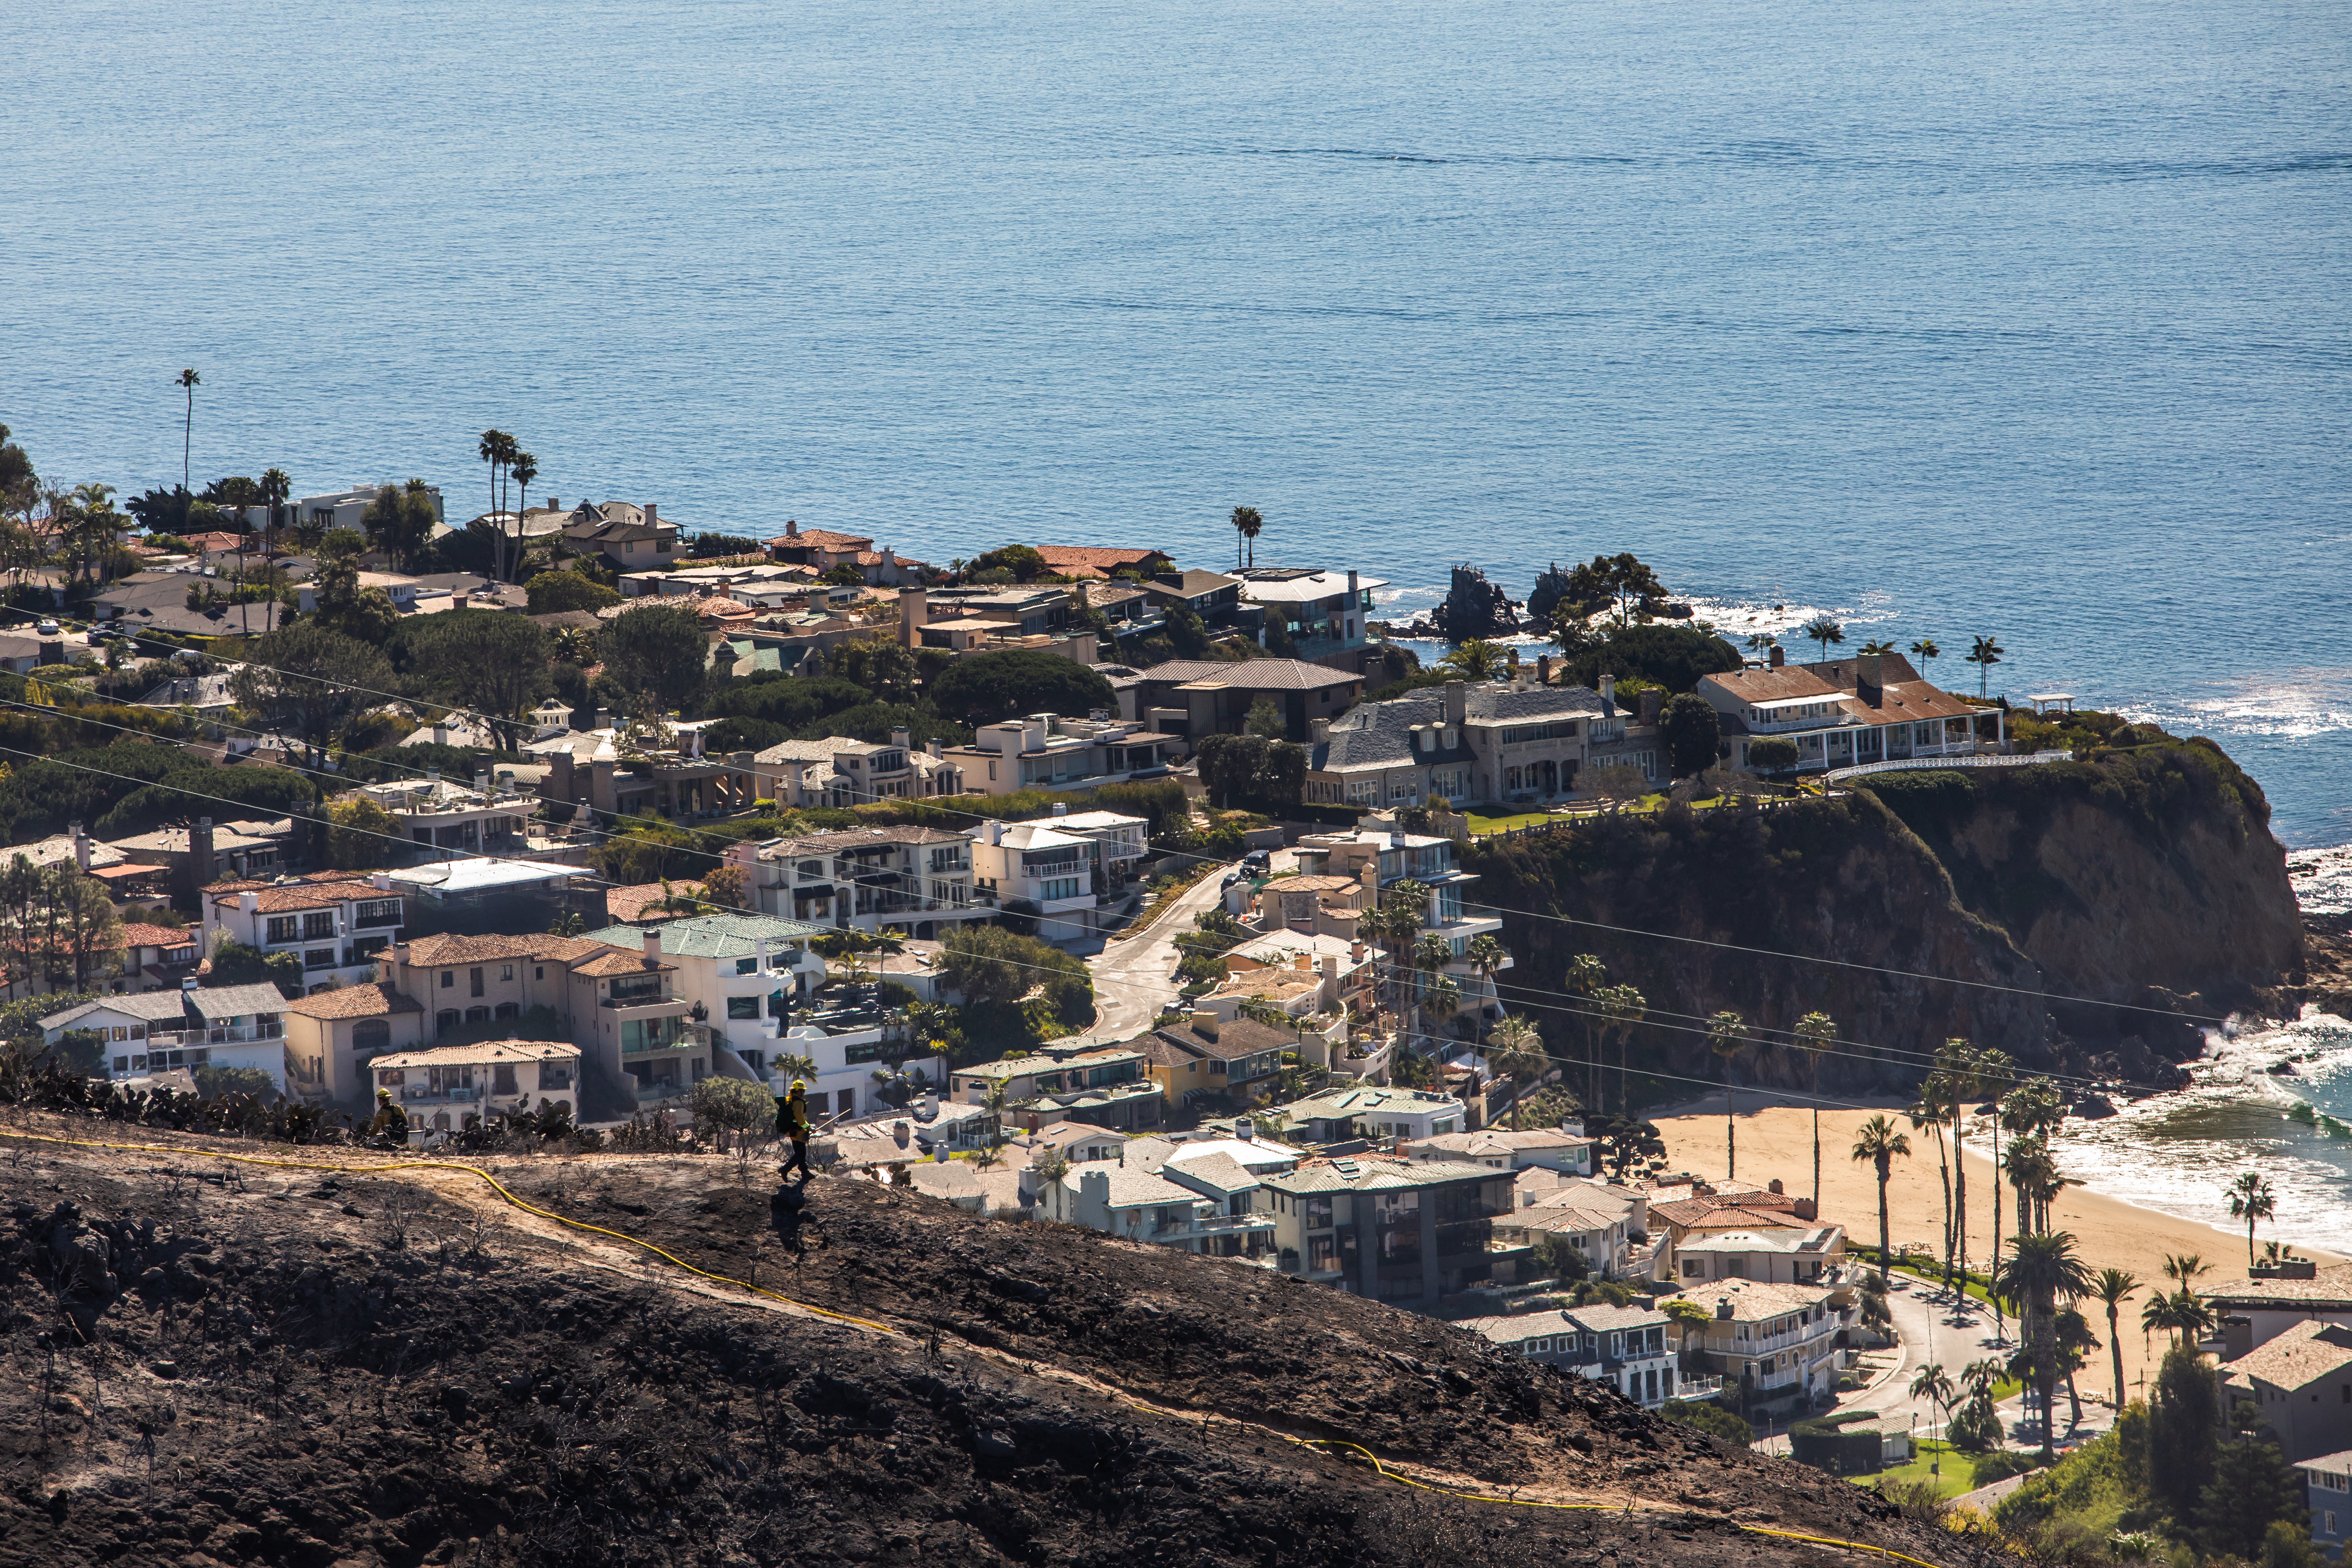 LAGUNA BEACH, CA - FEBRUARY 10: A firefighter monitors the situation on a smoldering hillside in Laguna Beach, California on February 10, 2022. A wind-driven brush fire that broke out in the hills near Laguna Beach amid high temperatures and low humidity forced residents to flee their homes early February 10, 2022. (Photo by Apu Gomes/Getty Images)